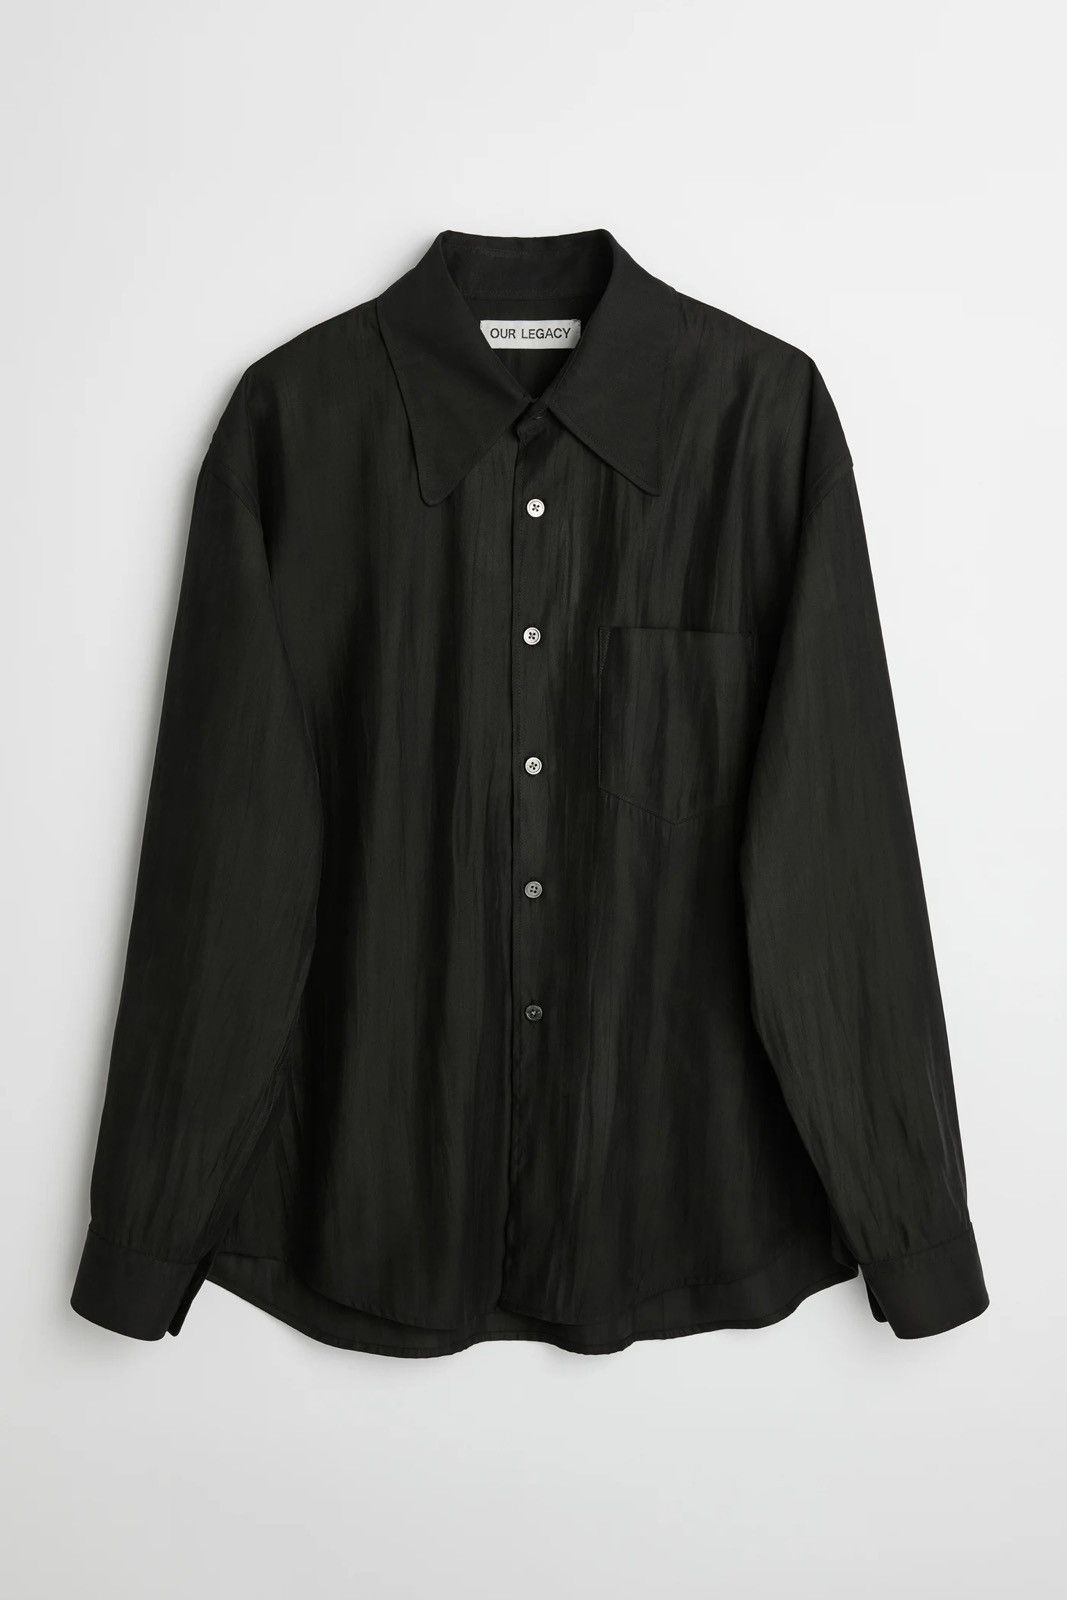 Our Legacy Coco 70 S Shirt | Grailed